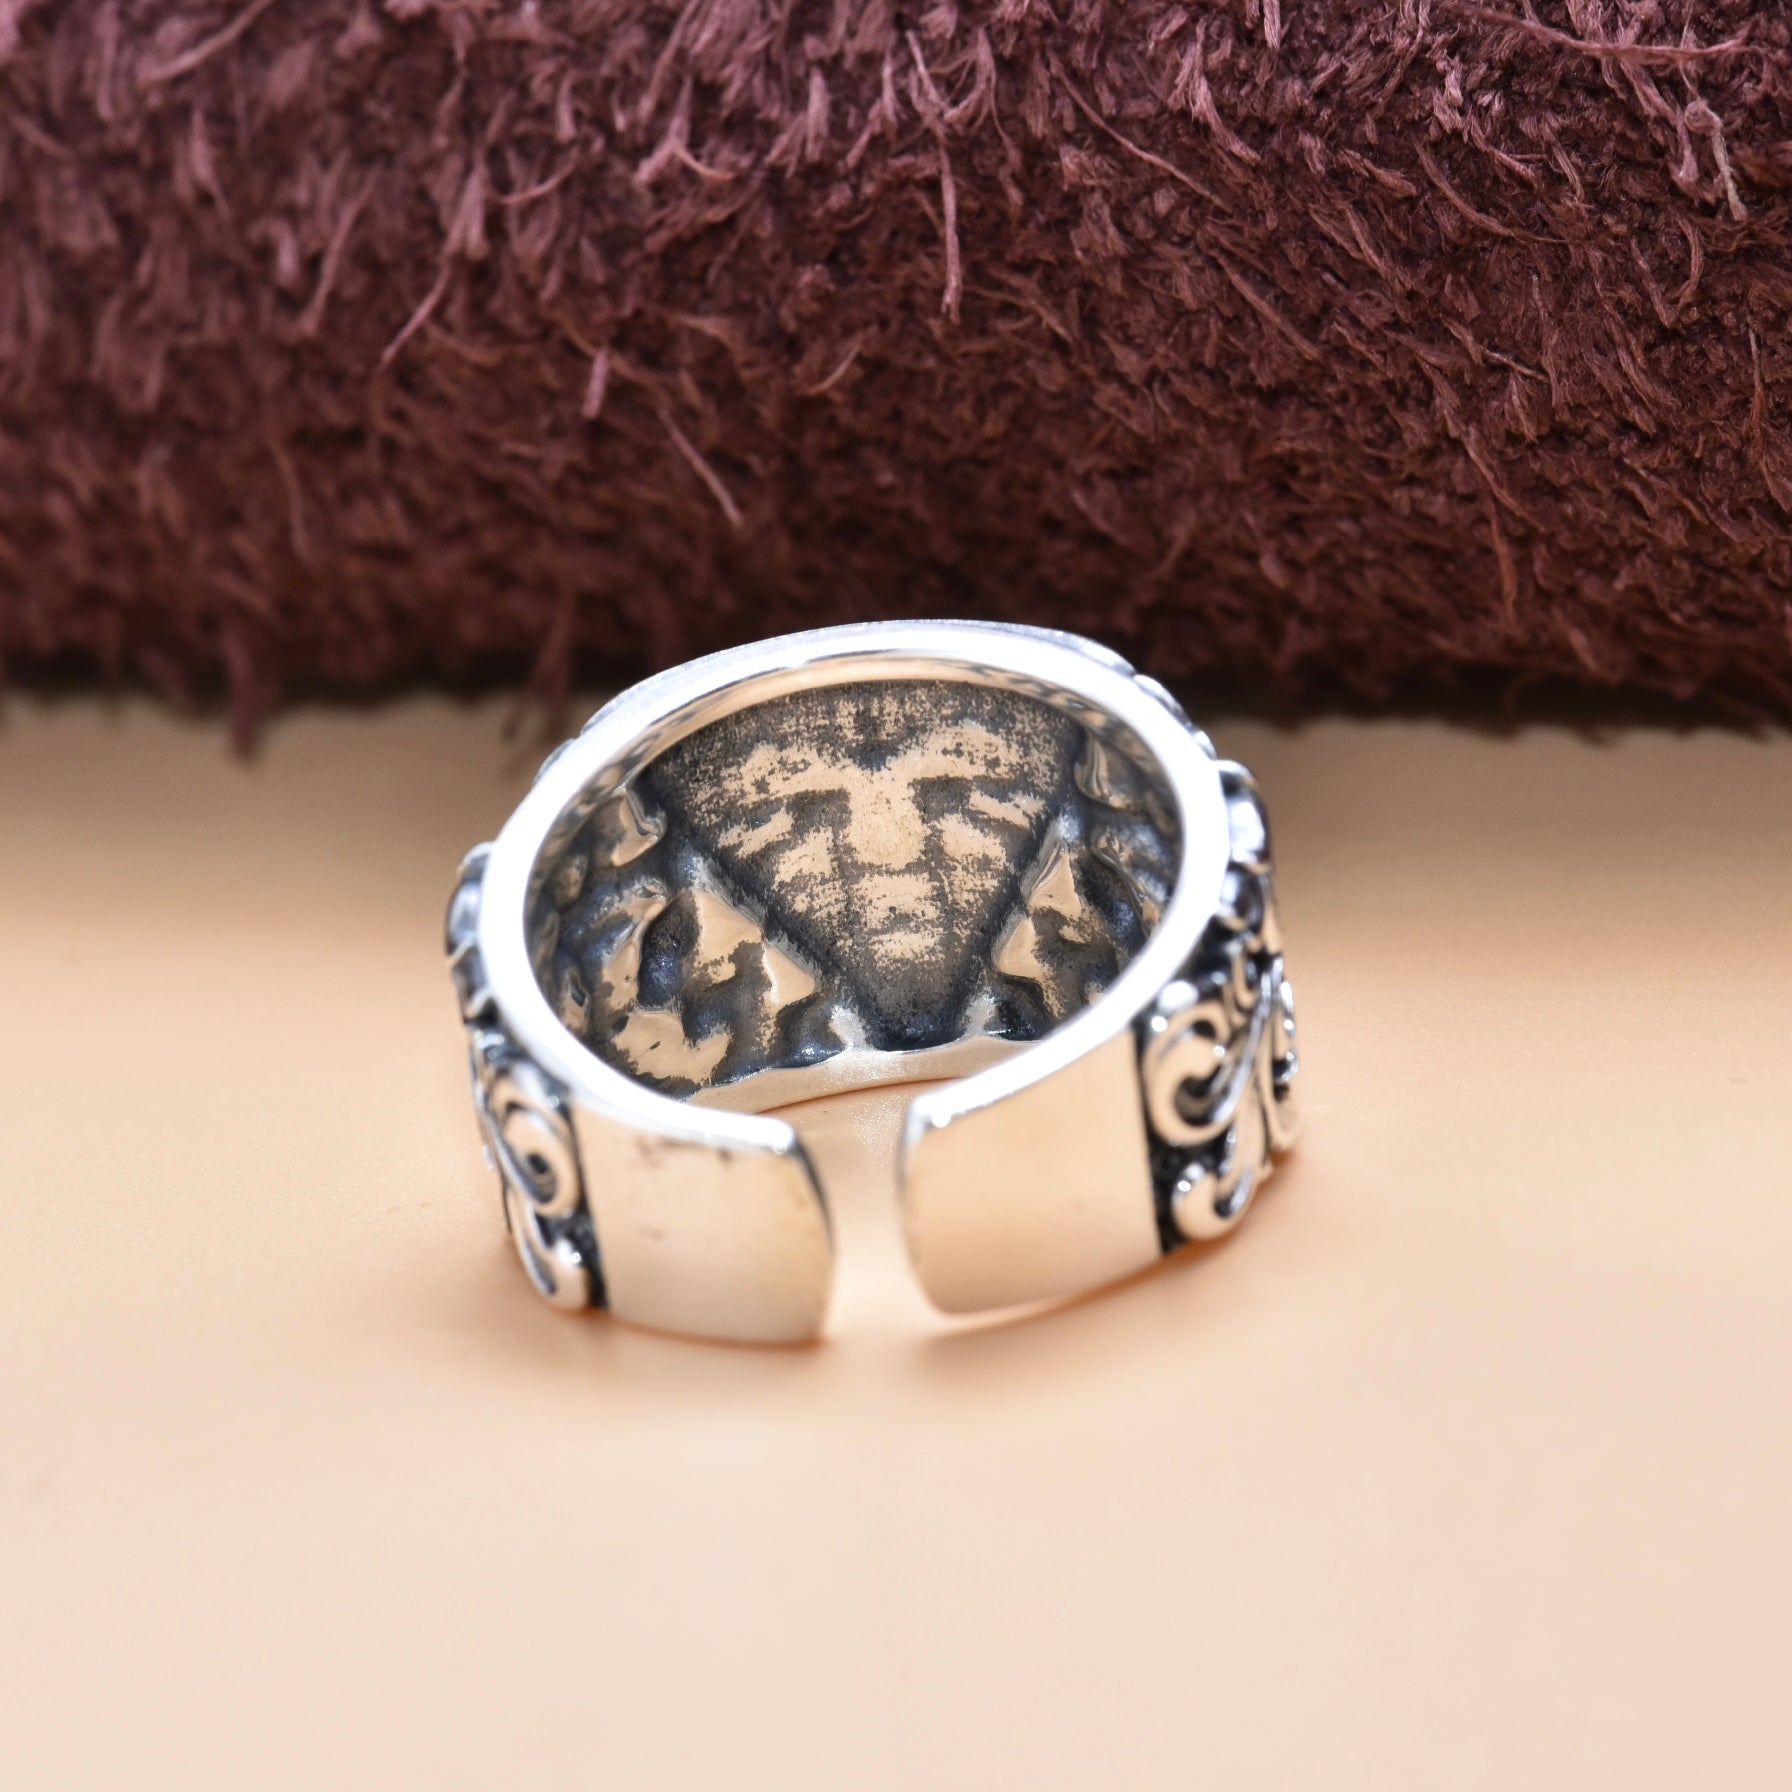 Adjustable silver ring displaying detailed artistry and a polished finish.